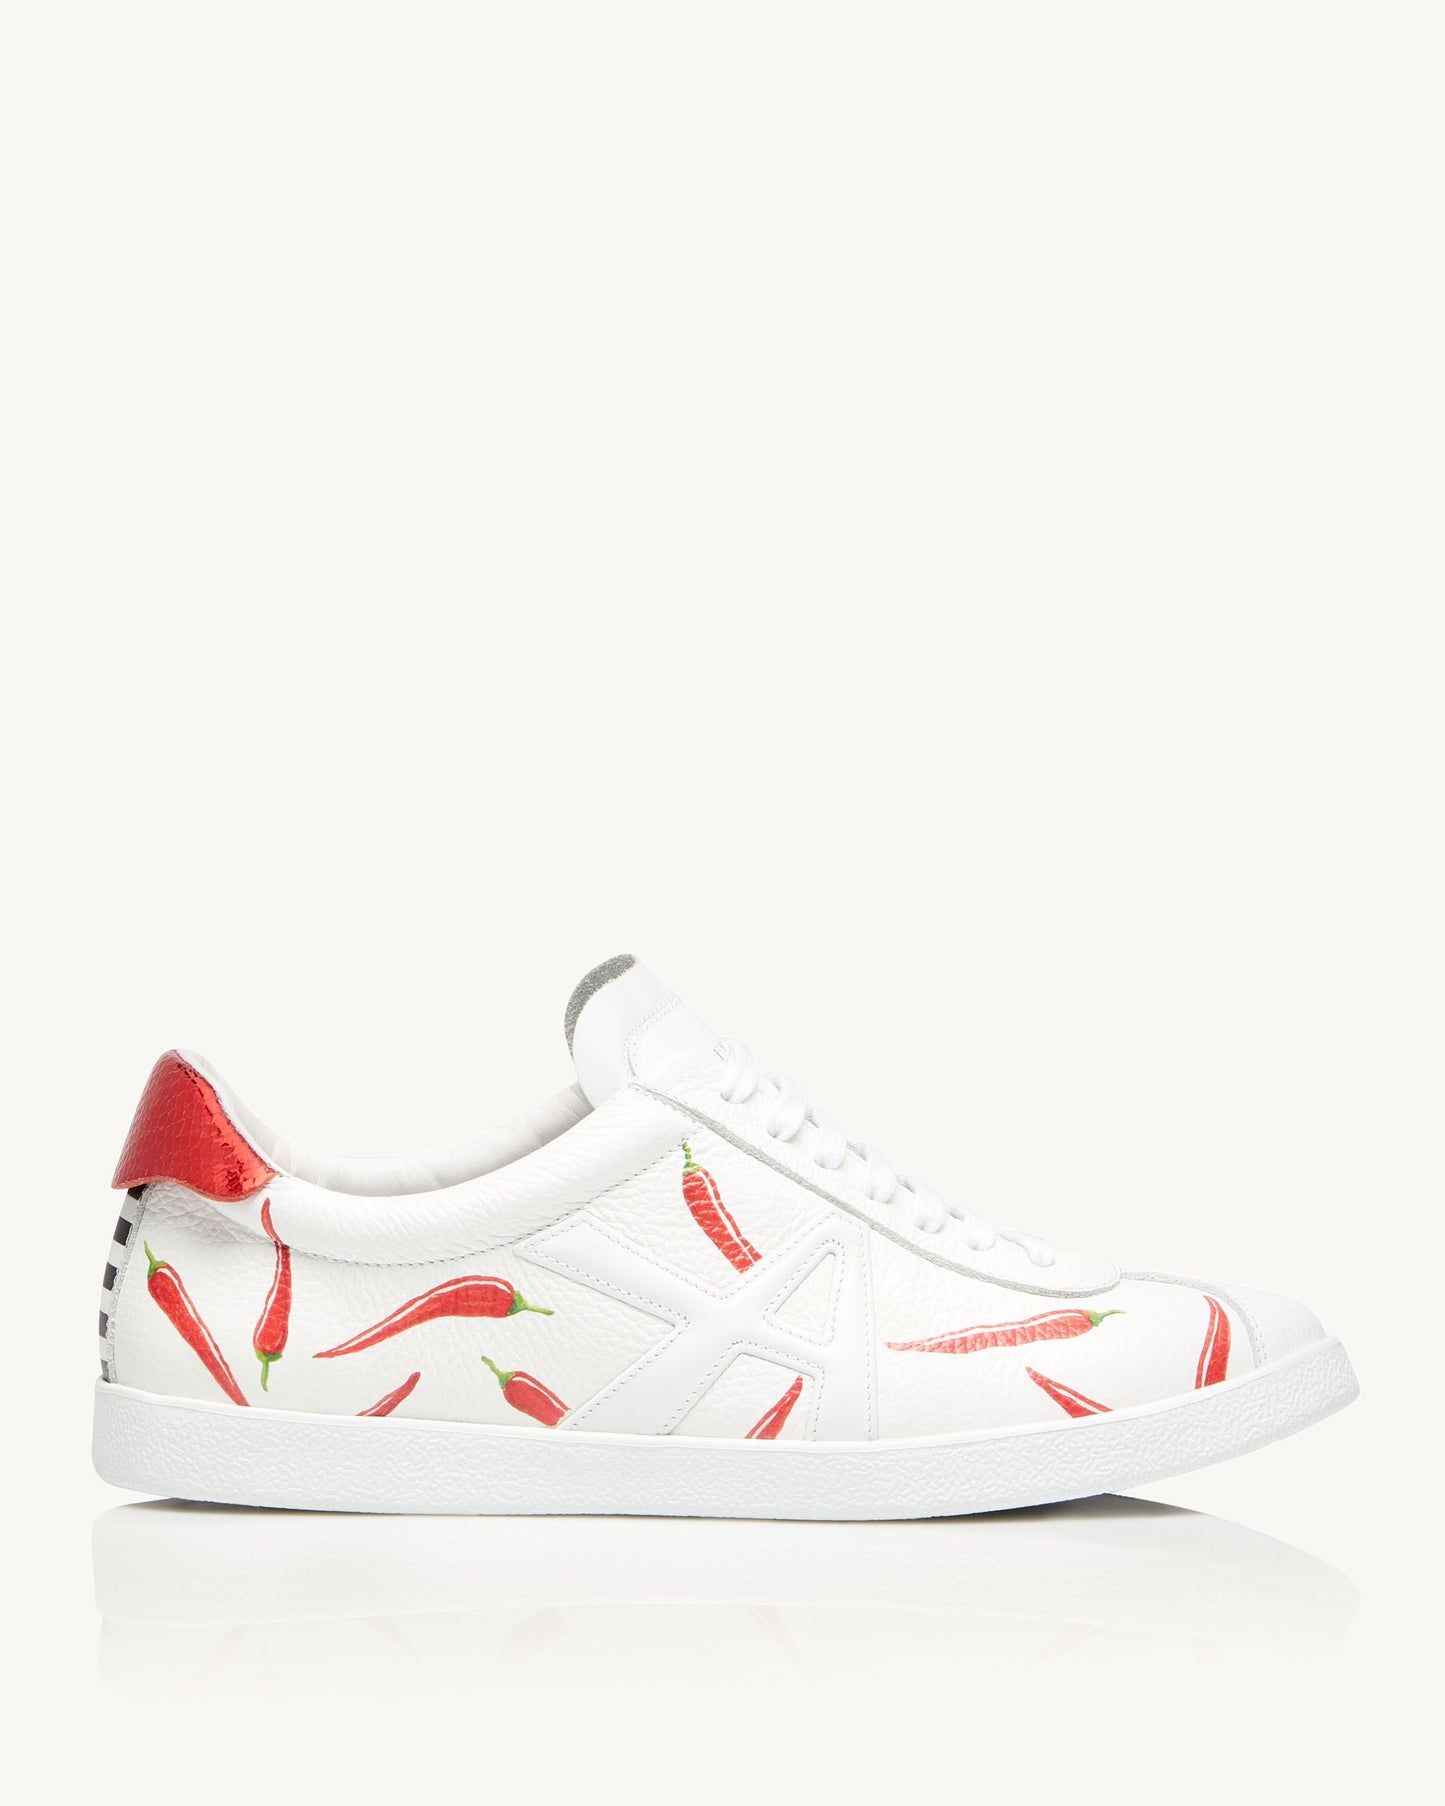 THE A CHILI SNEAKER WHITE/ RED